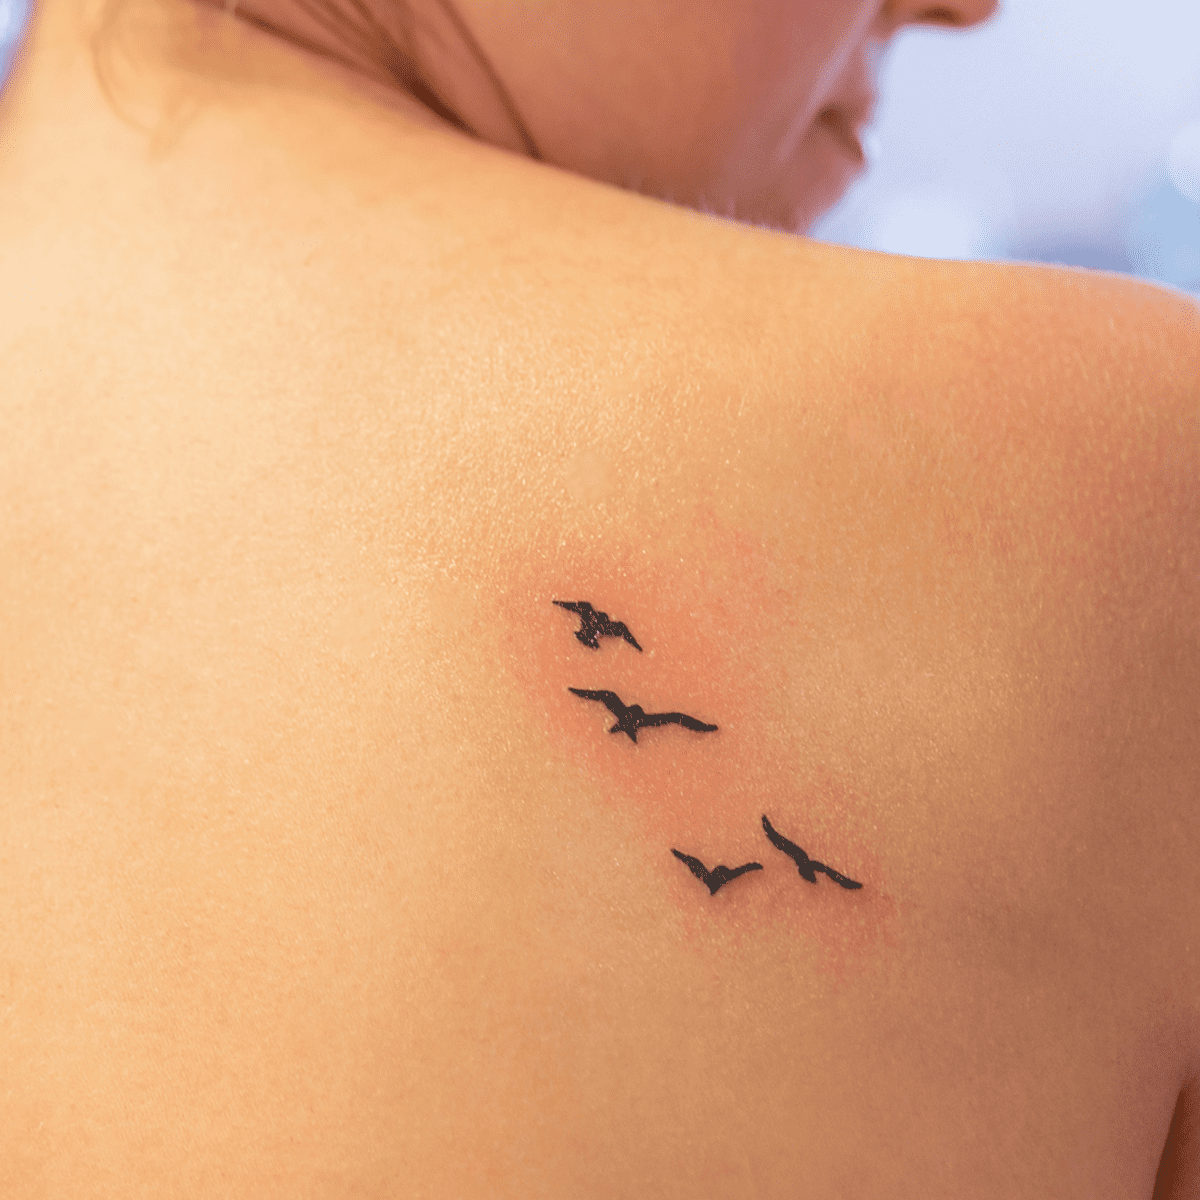 Why does blue tattoo ink look better than other colors? - Quora